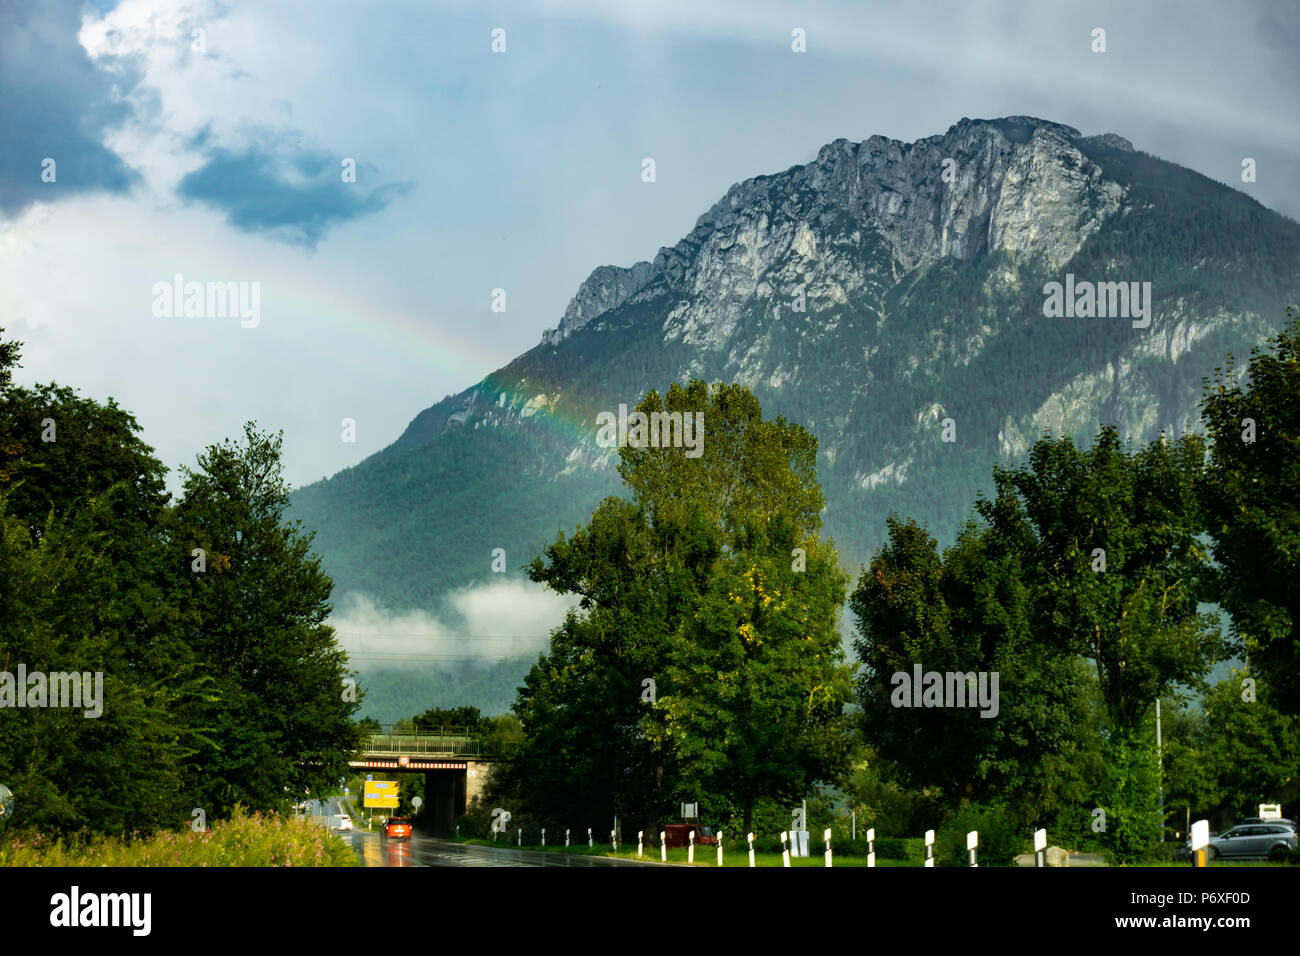 Rainbow over a mountain in the Bavarian countryside Stock Photo